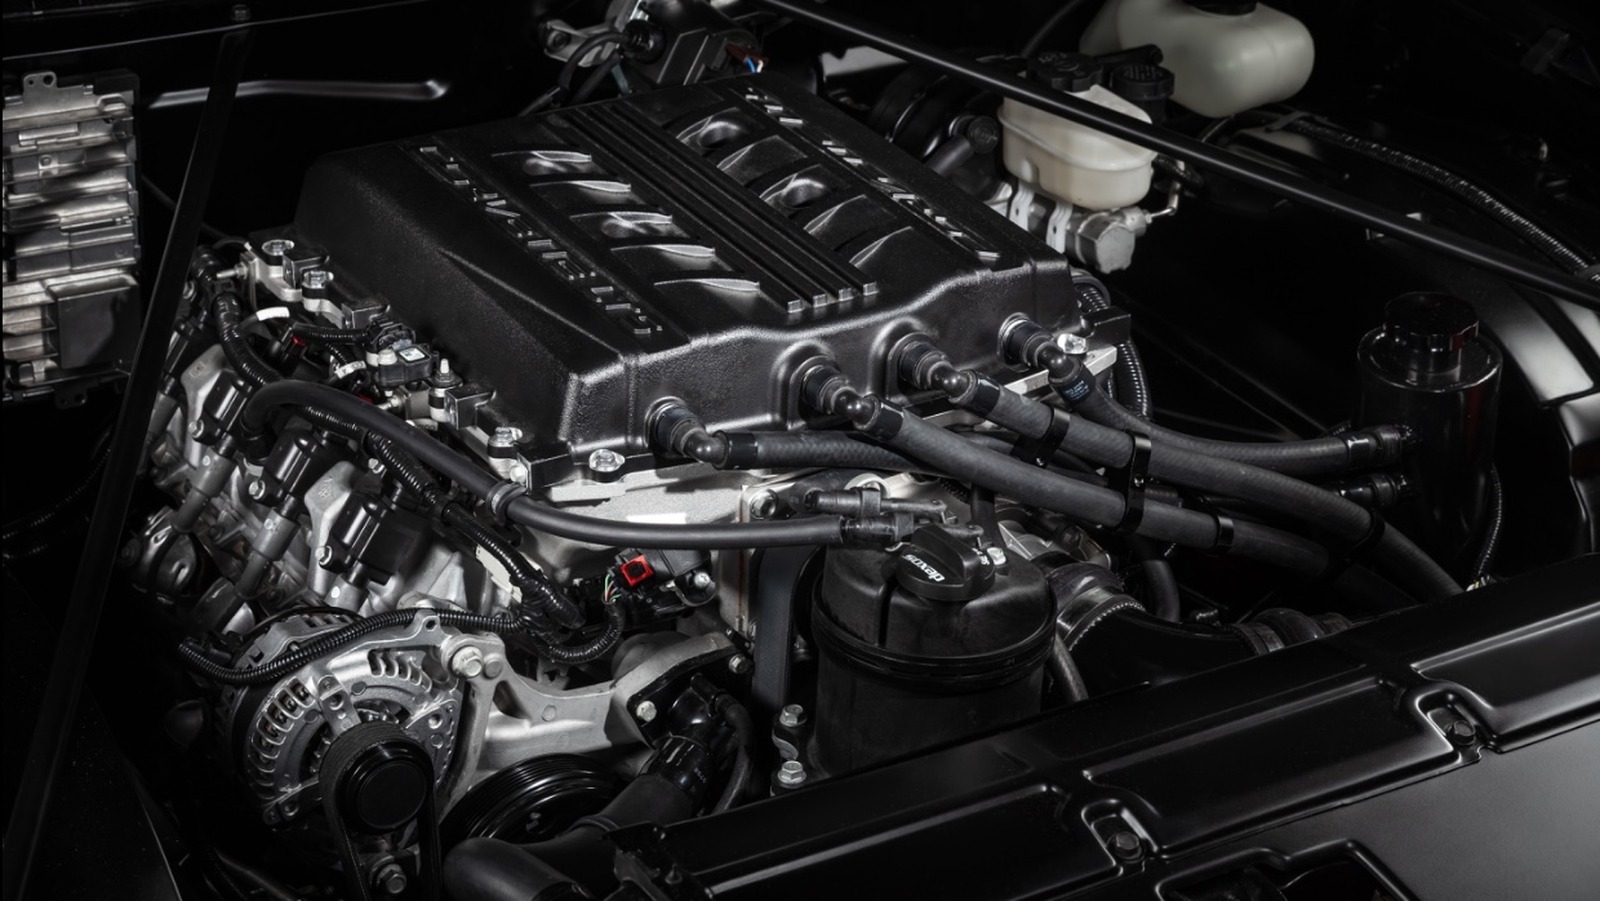 GM LT4 Vs. LT5 Engine: What's The Difference?